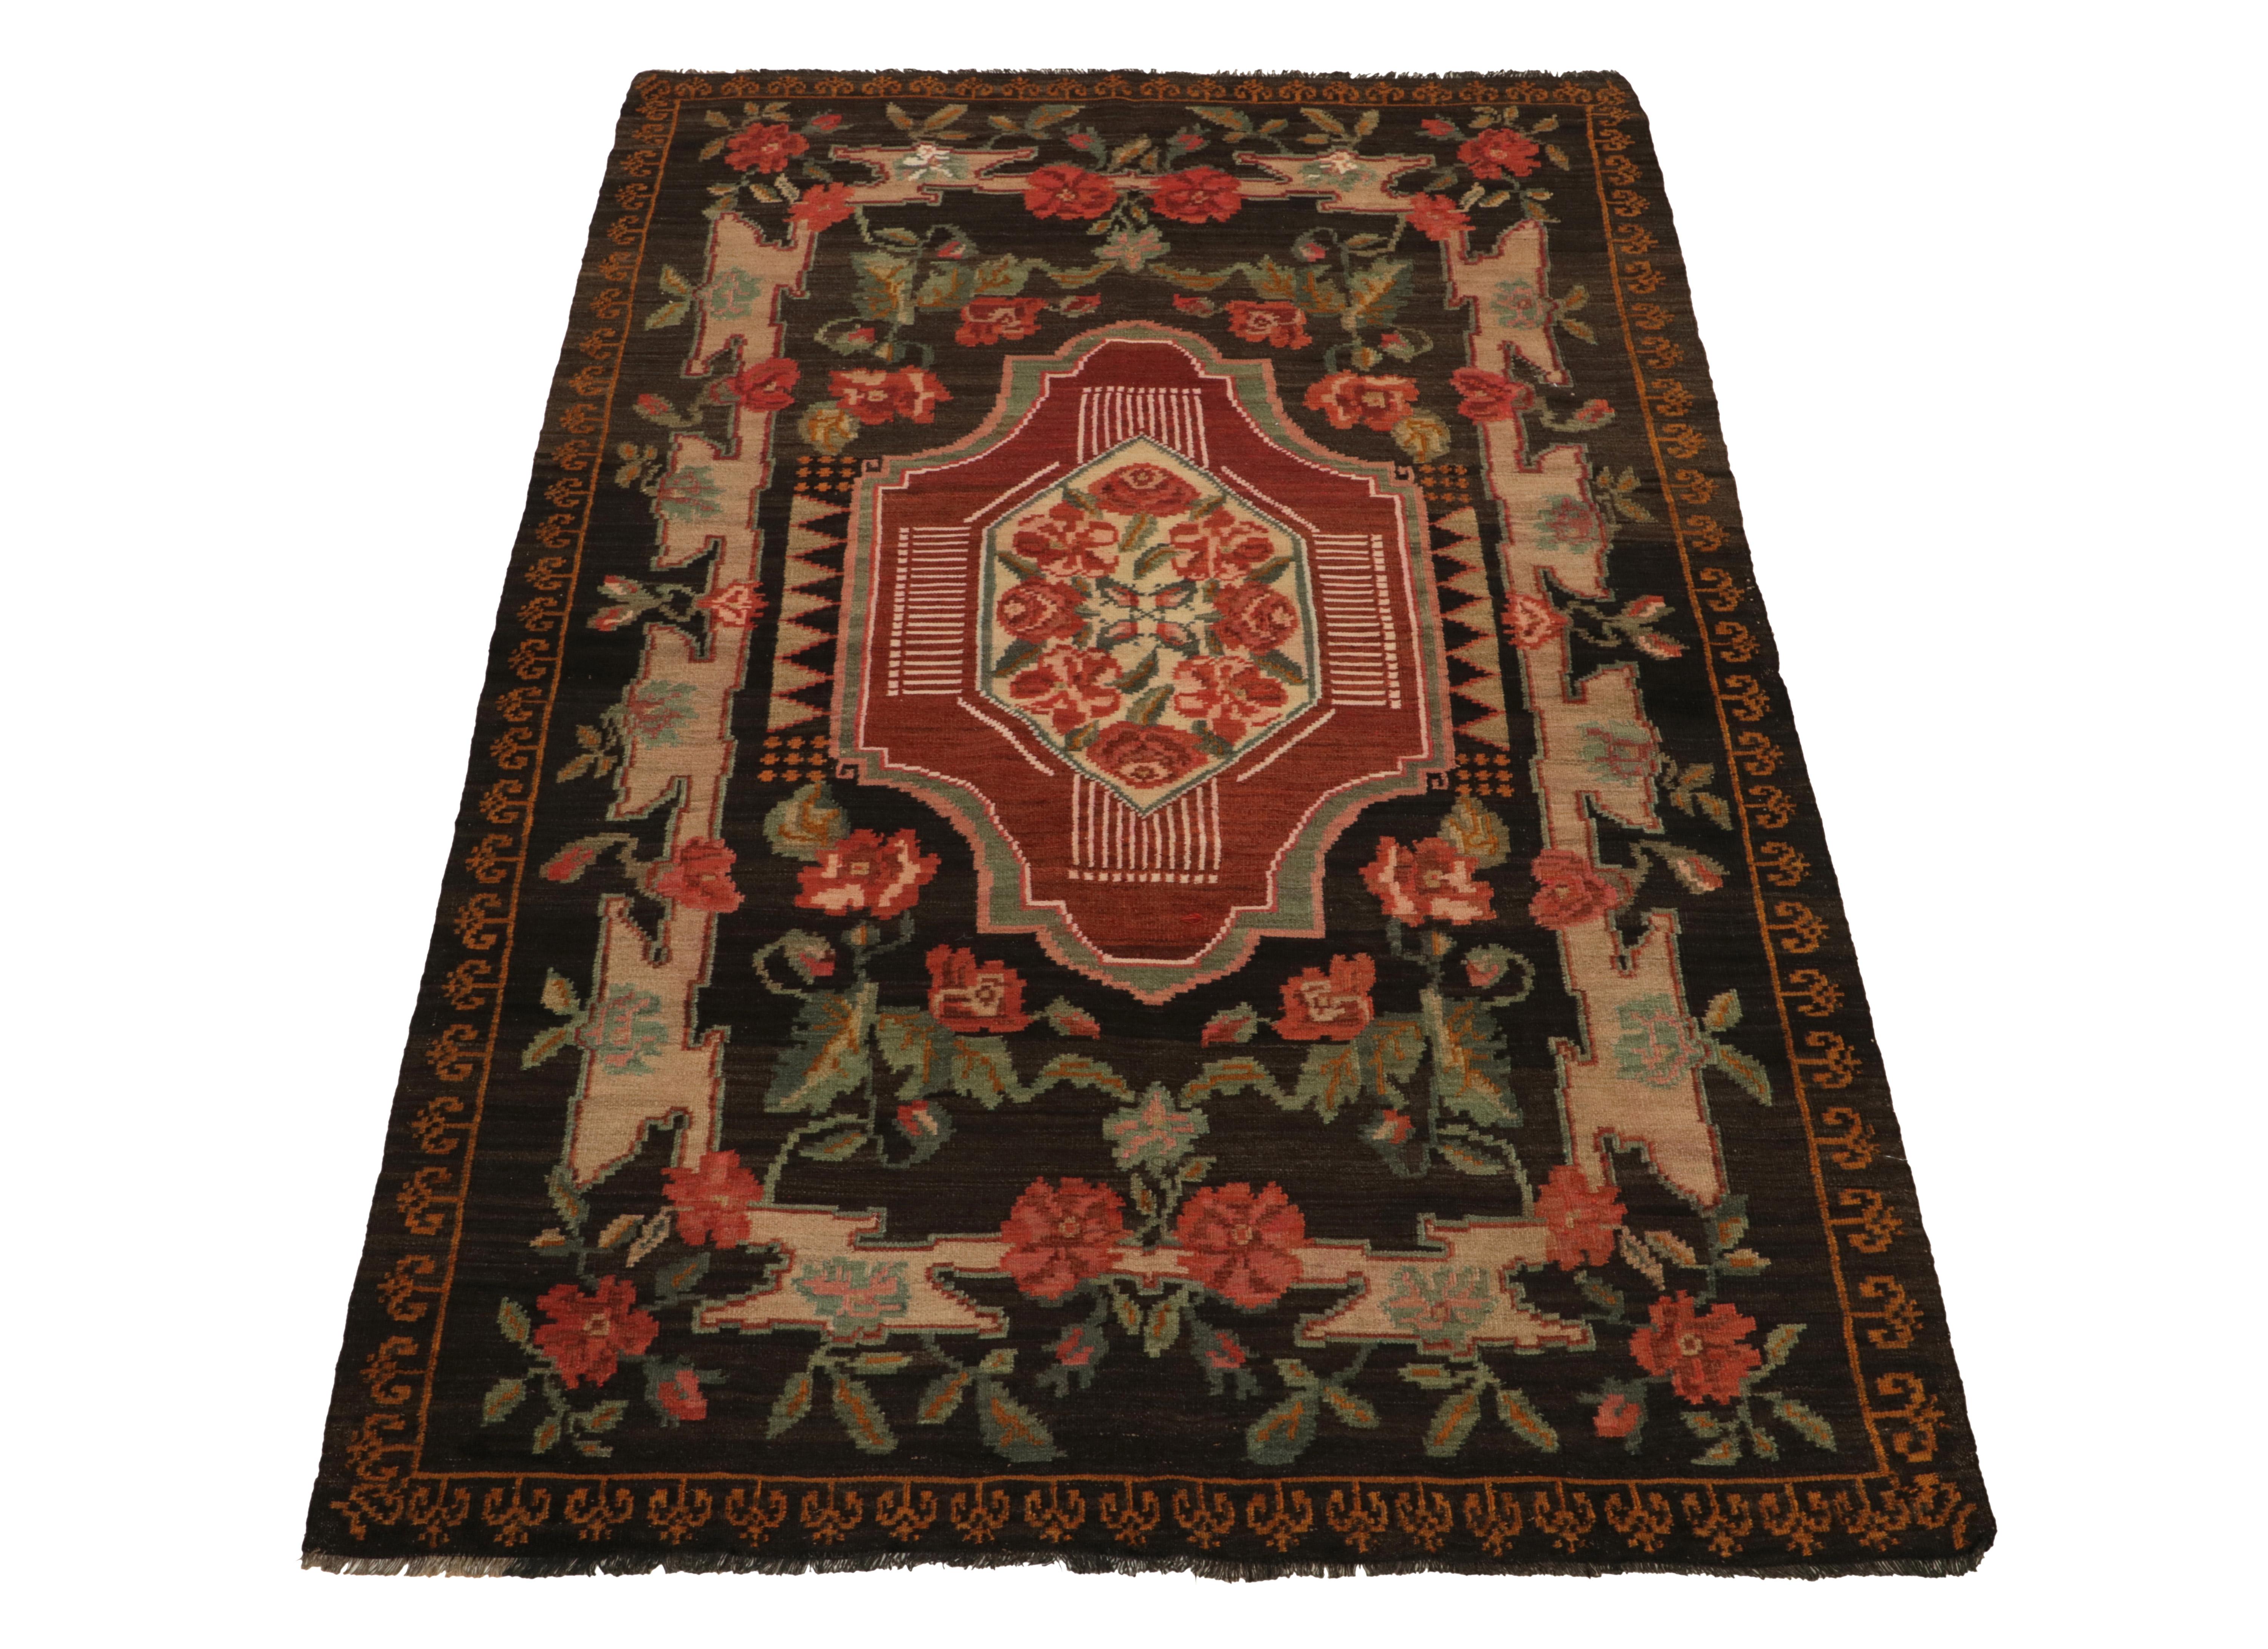 Handwoven in wool, a vintage Bessarabian kilim rug from our flatweave selections. Originating from Turkey circa 1950-1960, the creation carries an unusual European allure with rich red, brown & green florals flourishing on the deep frame for an